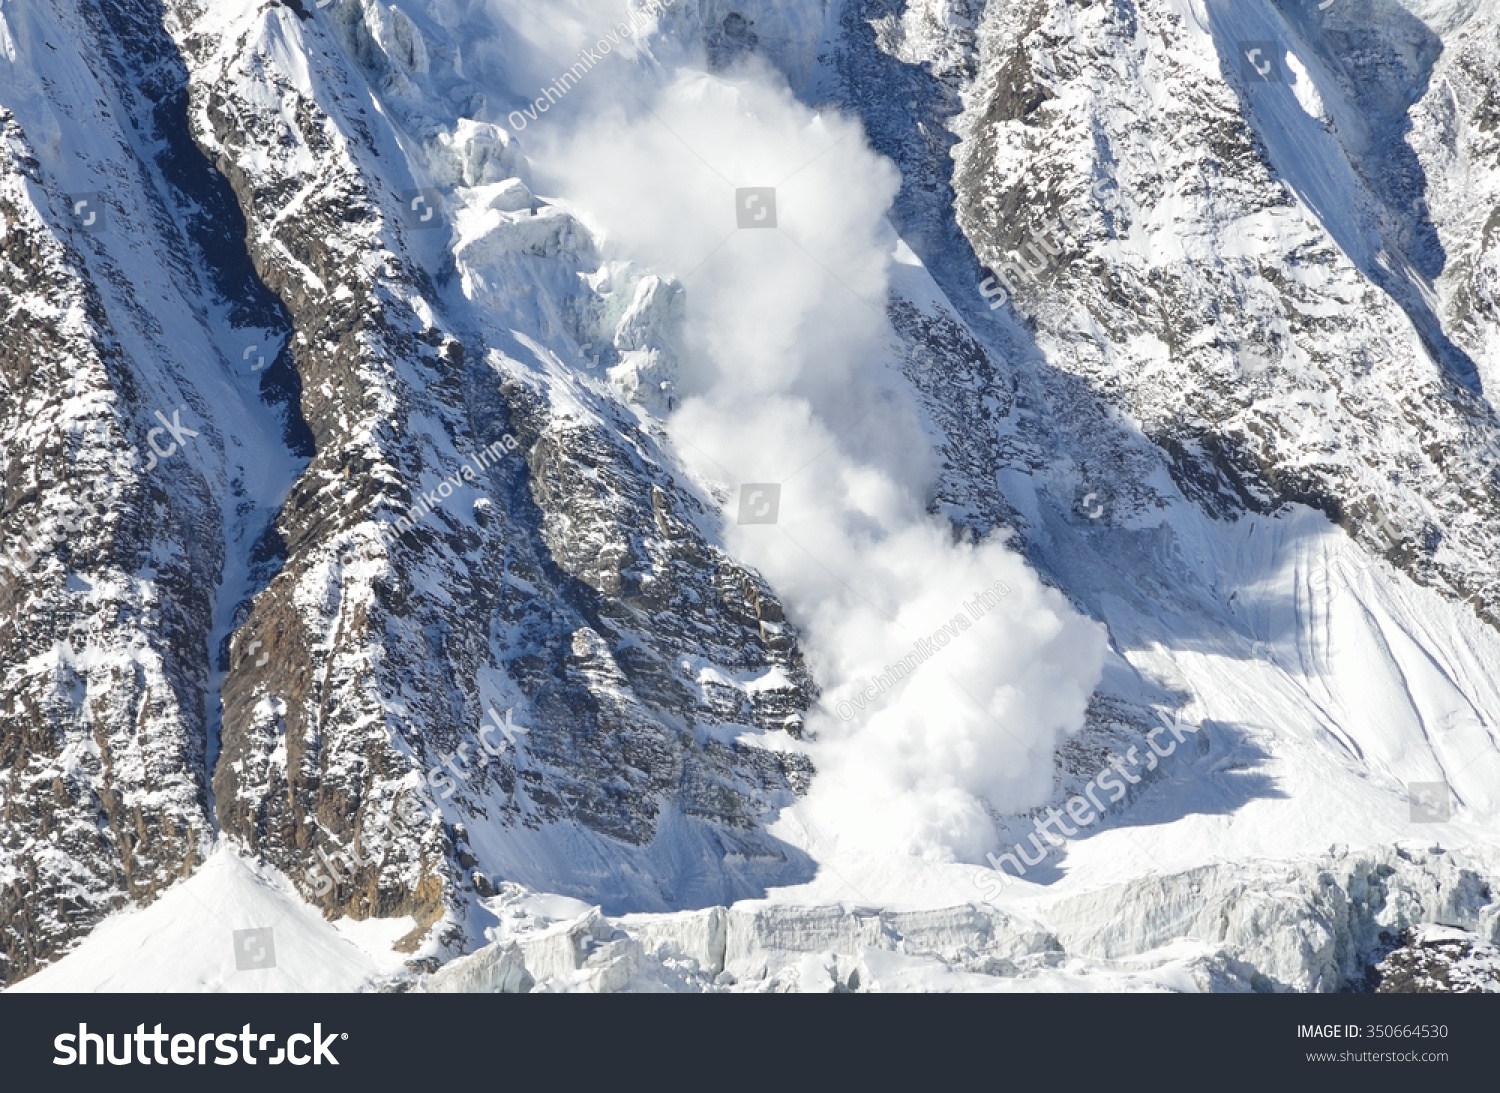 The avalanche in the Himalayas on Anapurna mountain #350664530